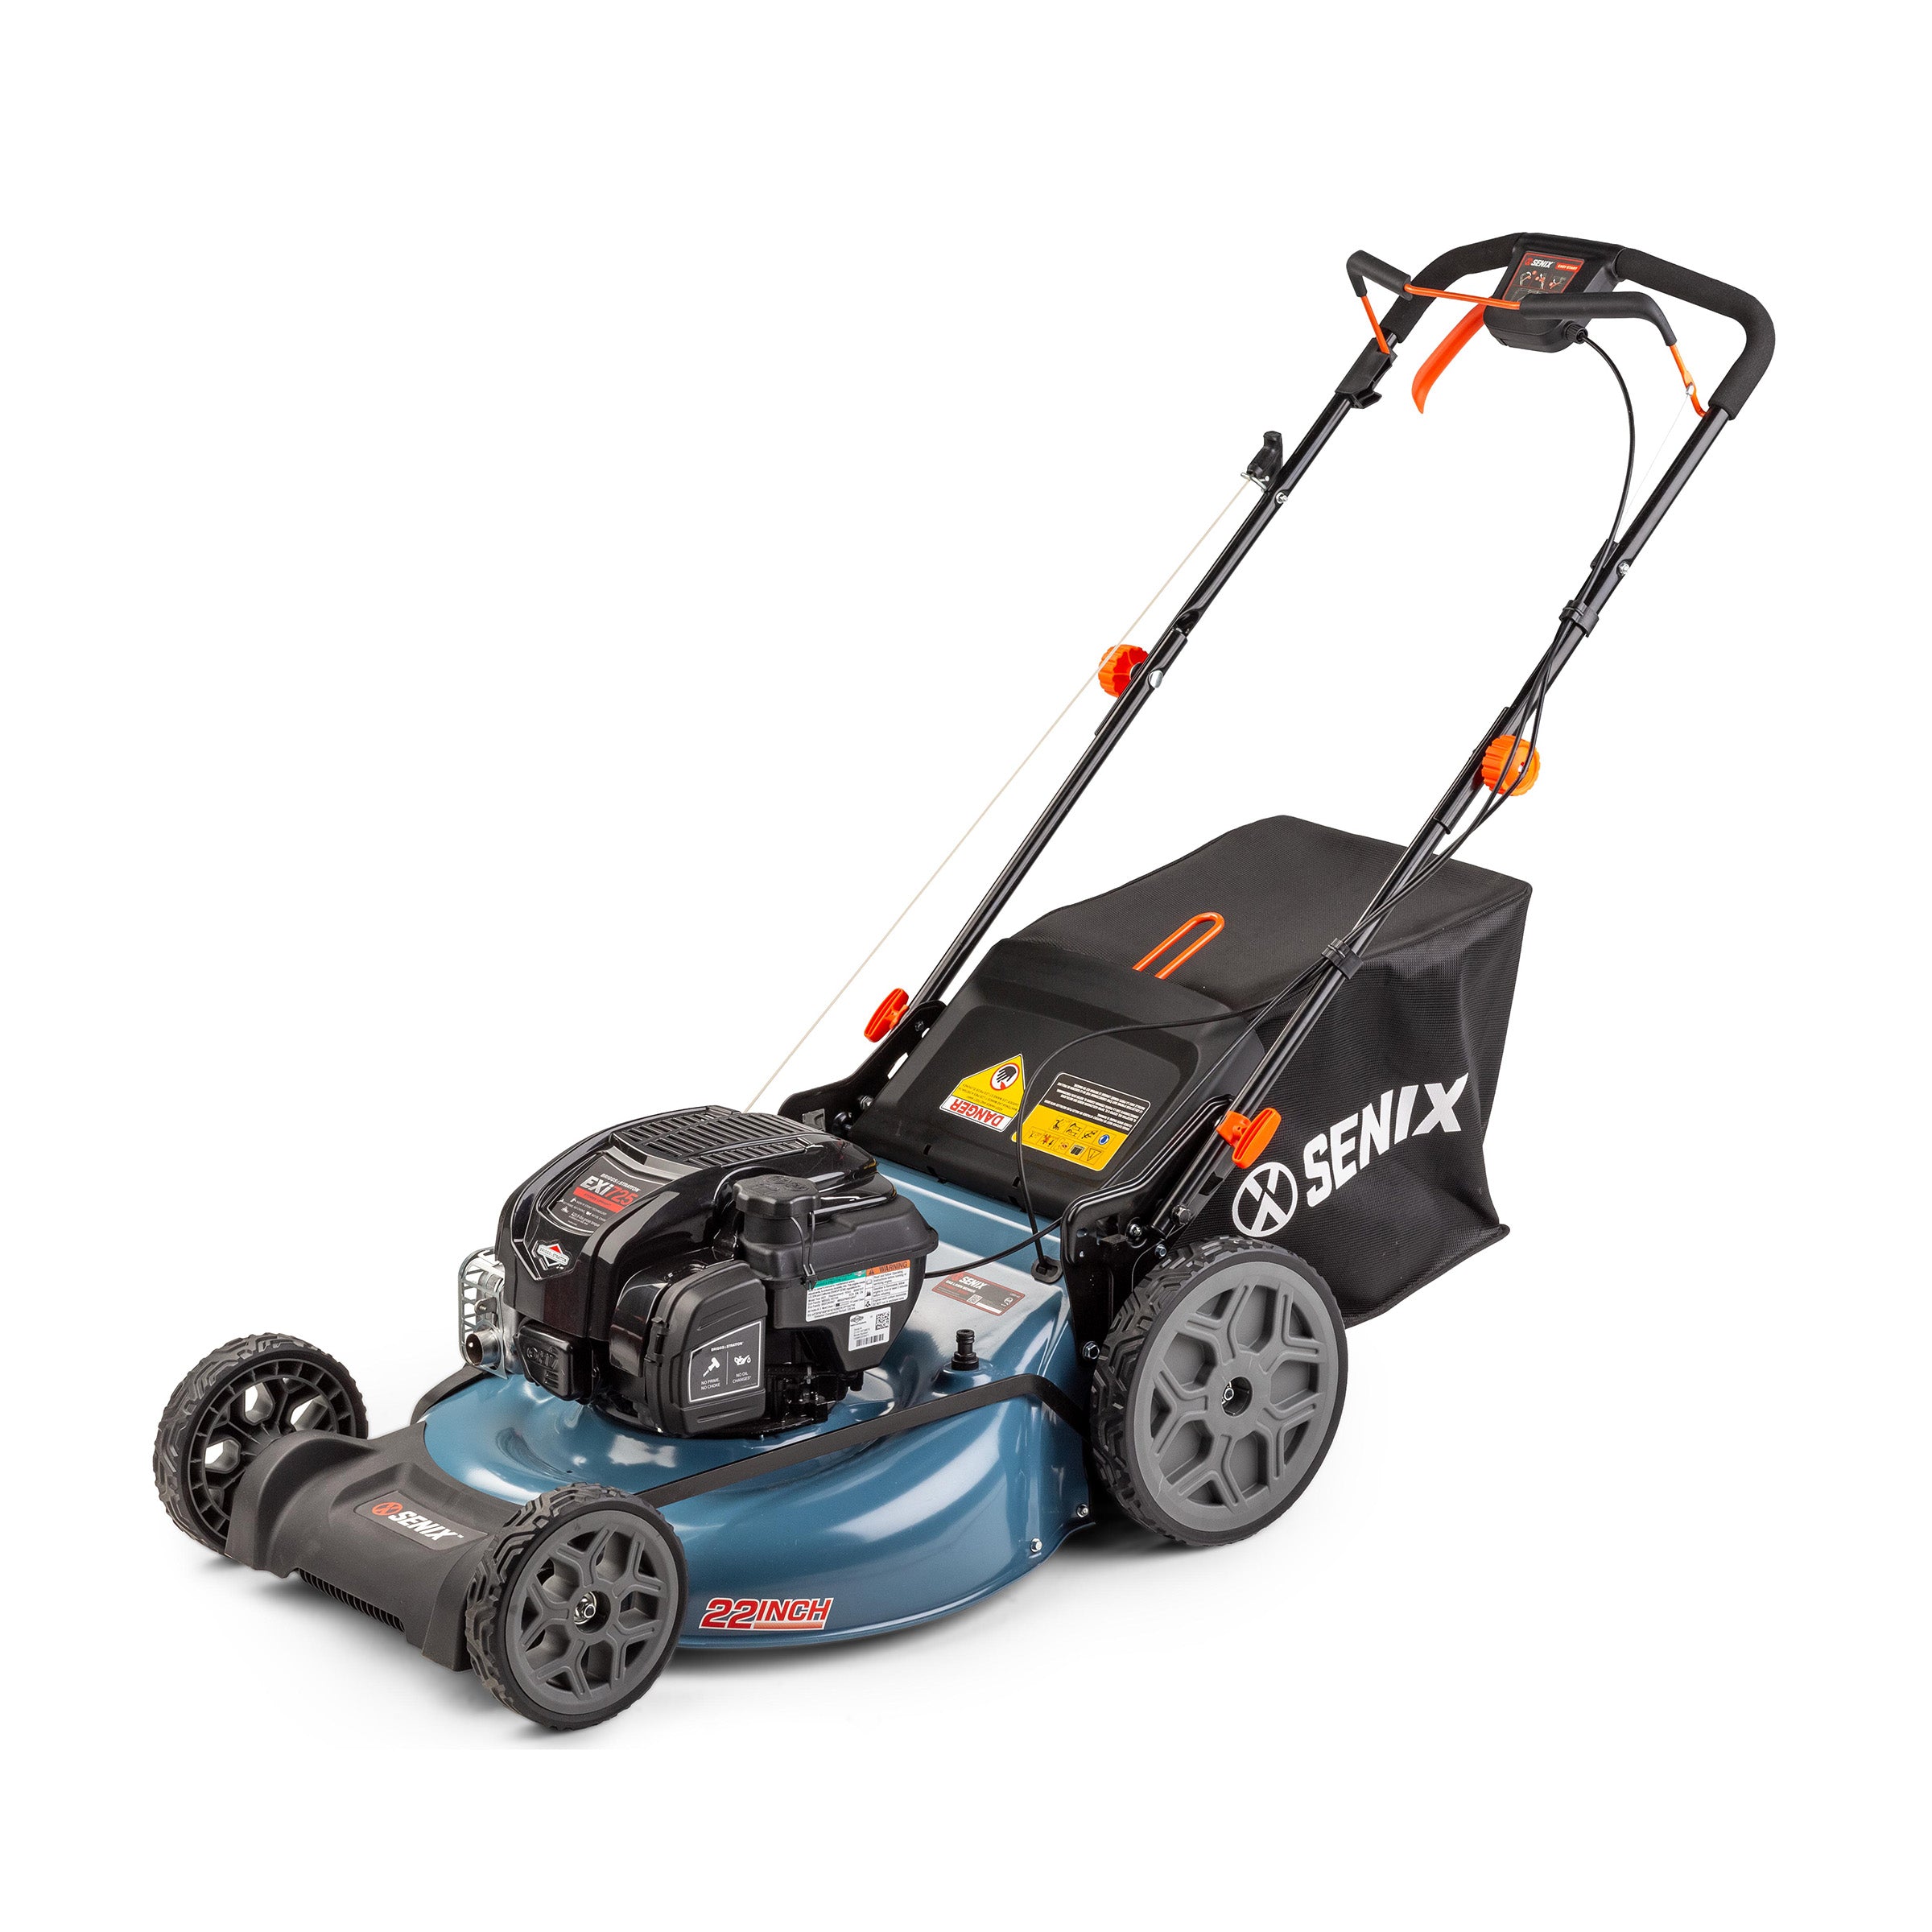 22-Inch 163 cc 4-Cycle Gas Powered Self-Propelled Lawn Mower